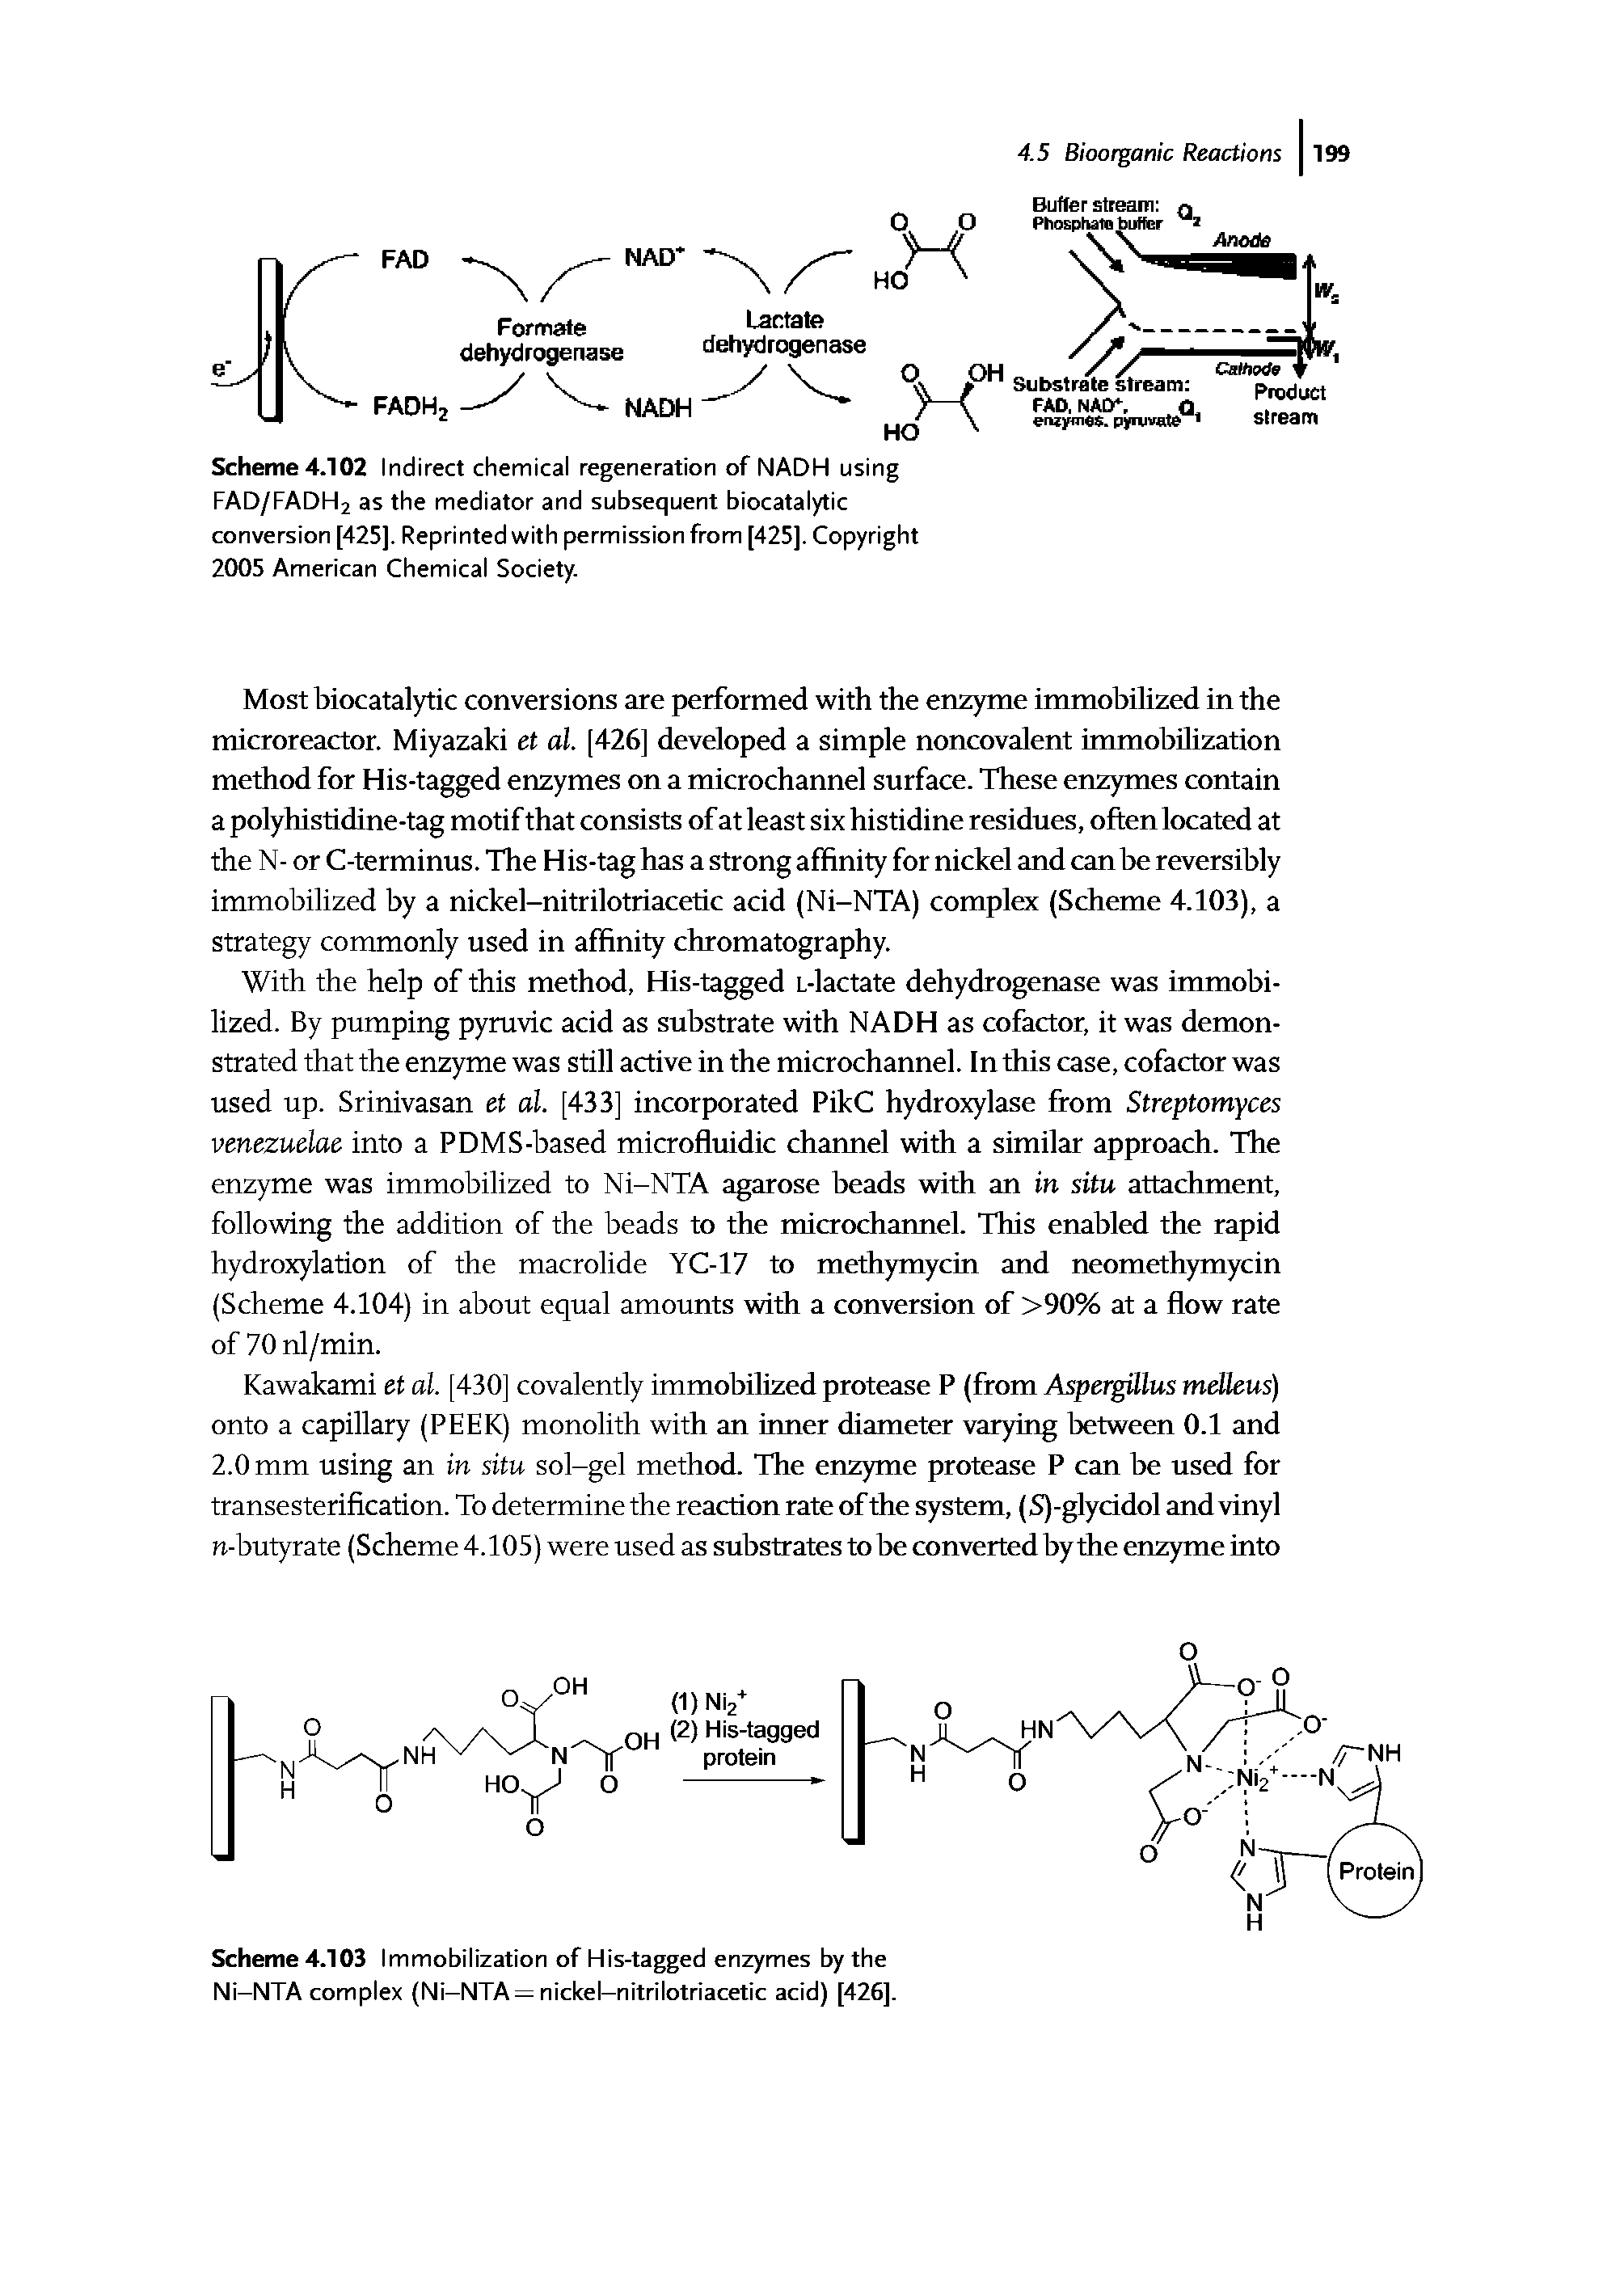 Scheme 4.102 Indirect chemical regeneration of NADH using FAD/FADH2 as the mediator and subsequent biocatalytic conversion [425]. Reprinted with permission from [425]. Copyright 2005 American Chemical Society.